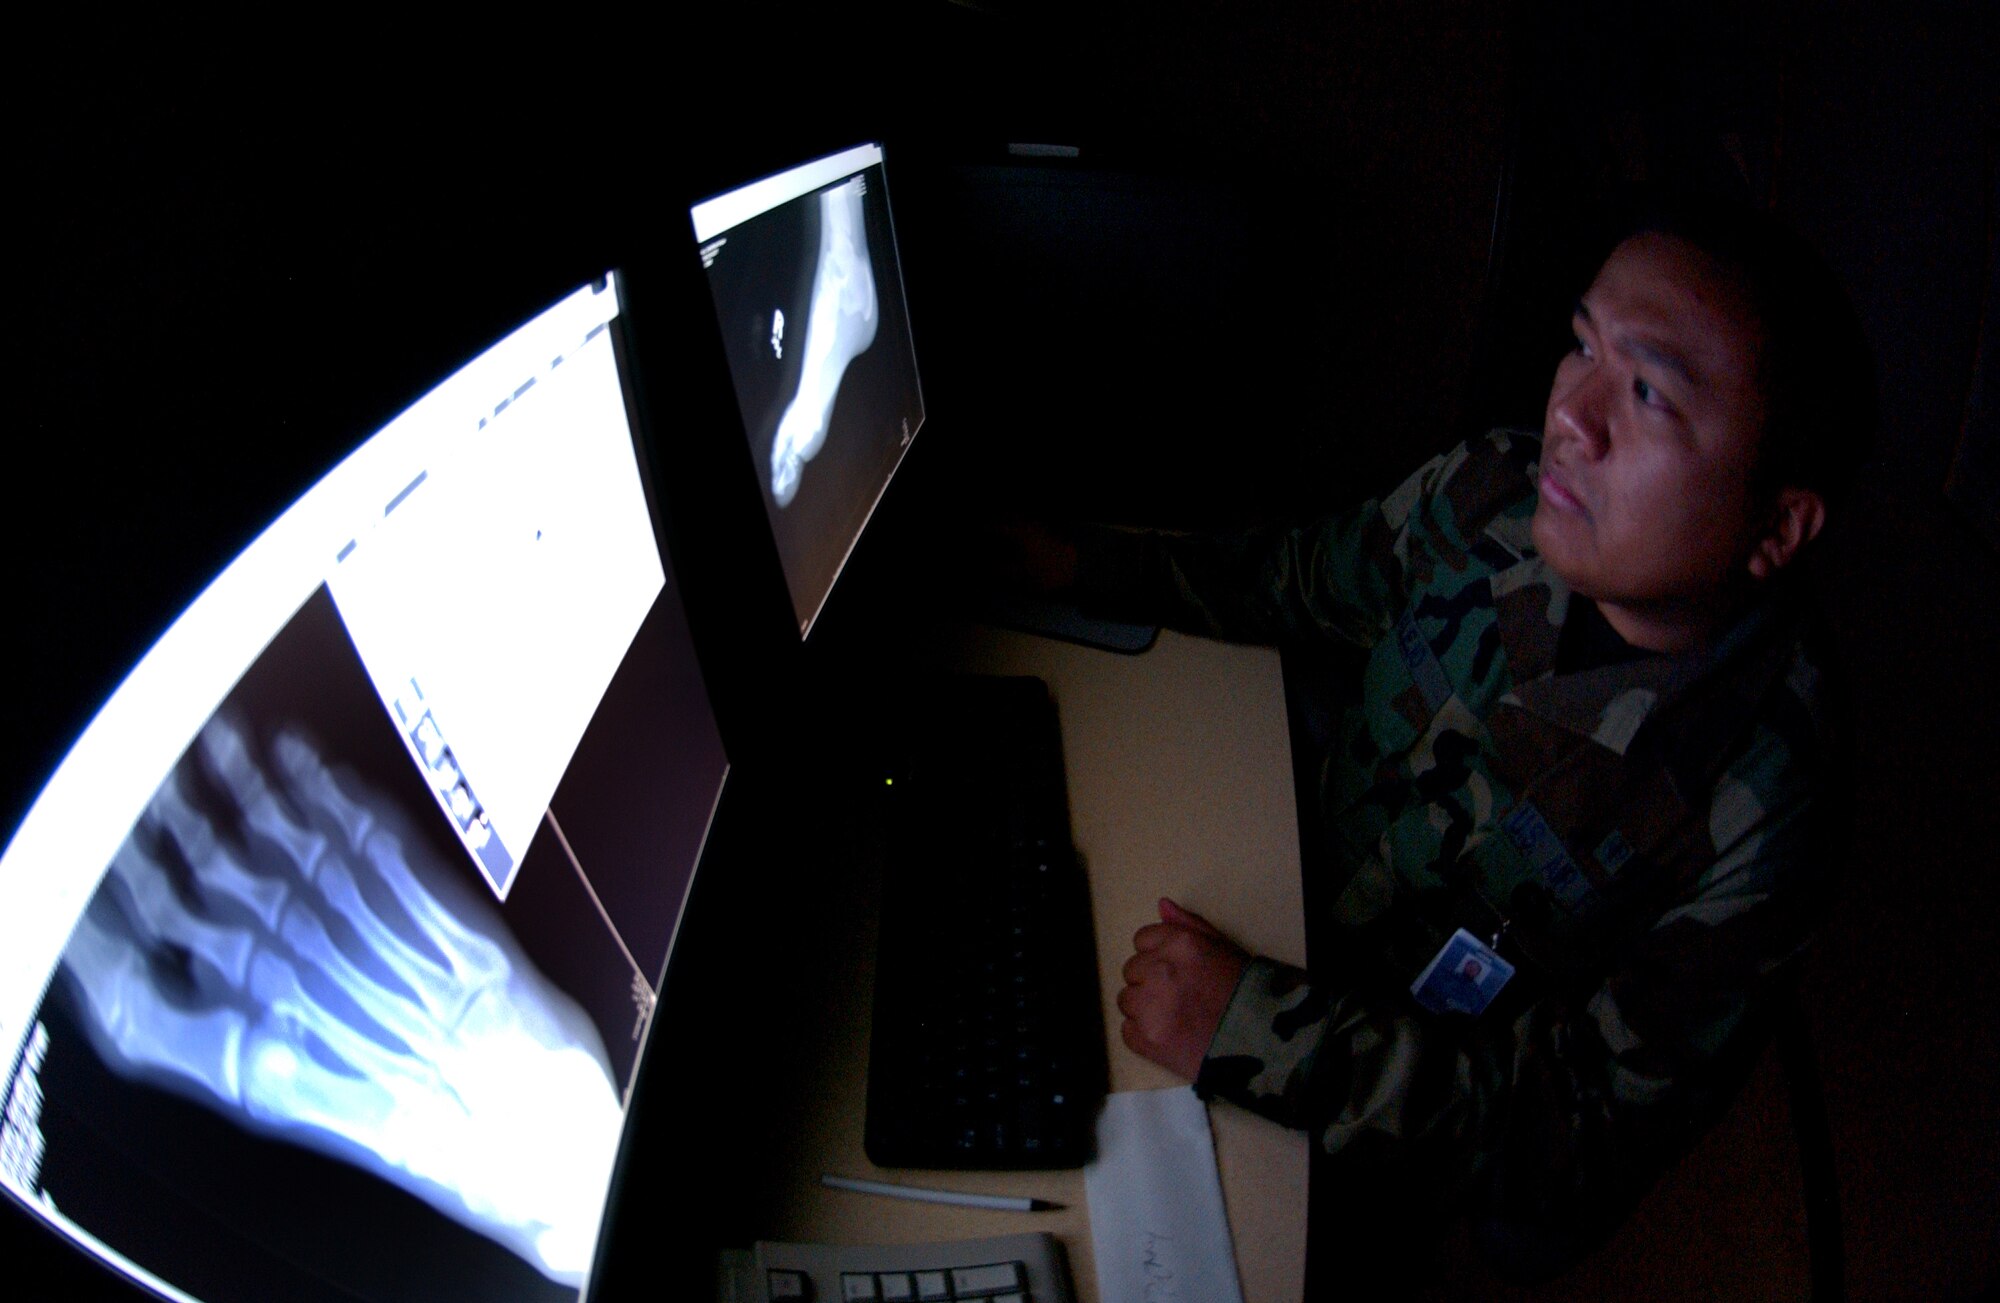 U.S Air Force Staff Sgt. Rutherford Alejo, a Diagnostic Imaging Technician assigned to the 354th Medical Group, Eielson Air Force Base, Alaska views and analyzes a processed radiograph of a foot for quality control before sending the images to the physician who requested the x-ray. Each processed radiograph is checked for correct exposure, proper position, and other items to ensure the radiograph is free from any defects and the area being examined is clear based on position and exposure so the physician can make a precise diagnosis.

(U.S Air Force photo by: Staff Sgt Eric T. Sheler)
